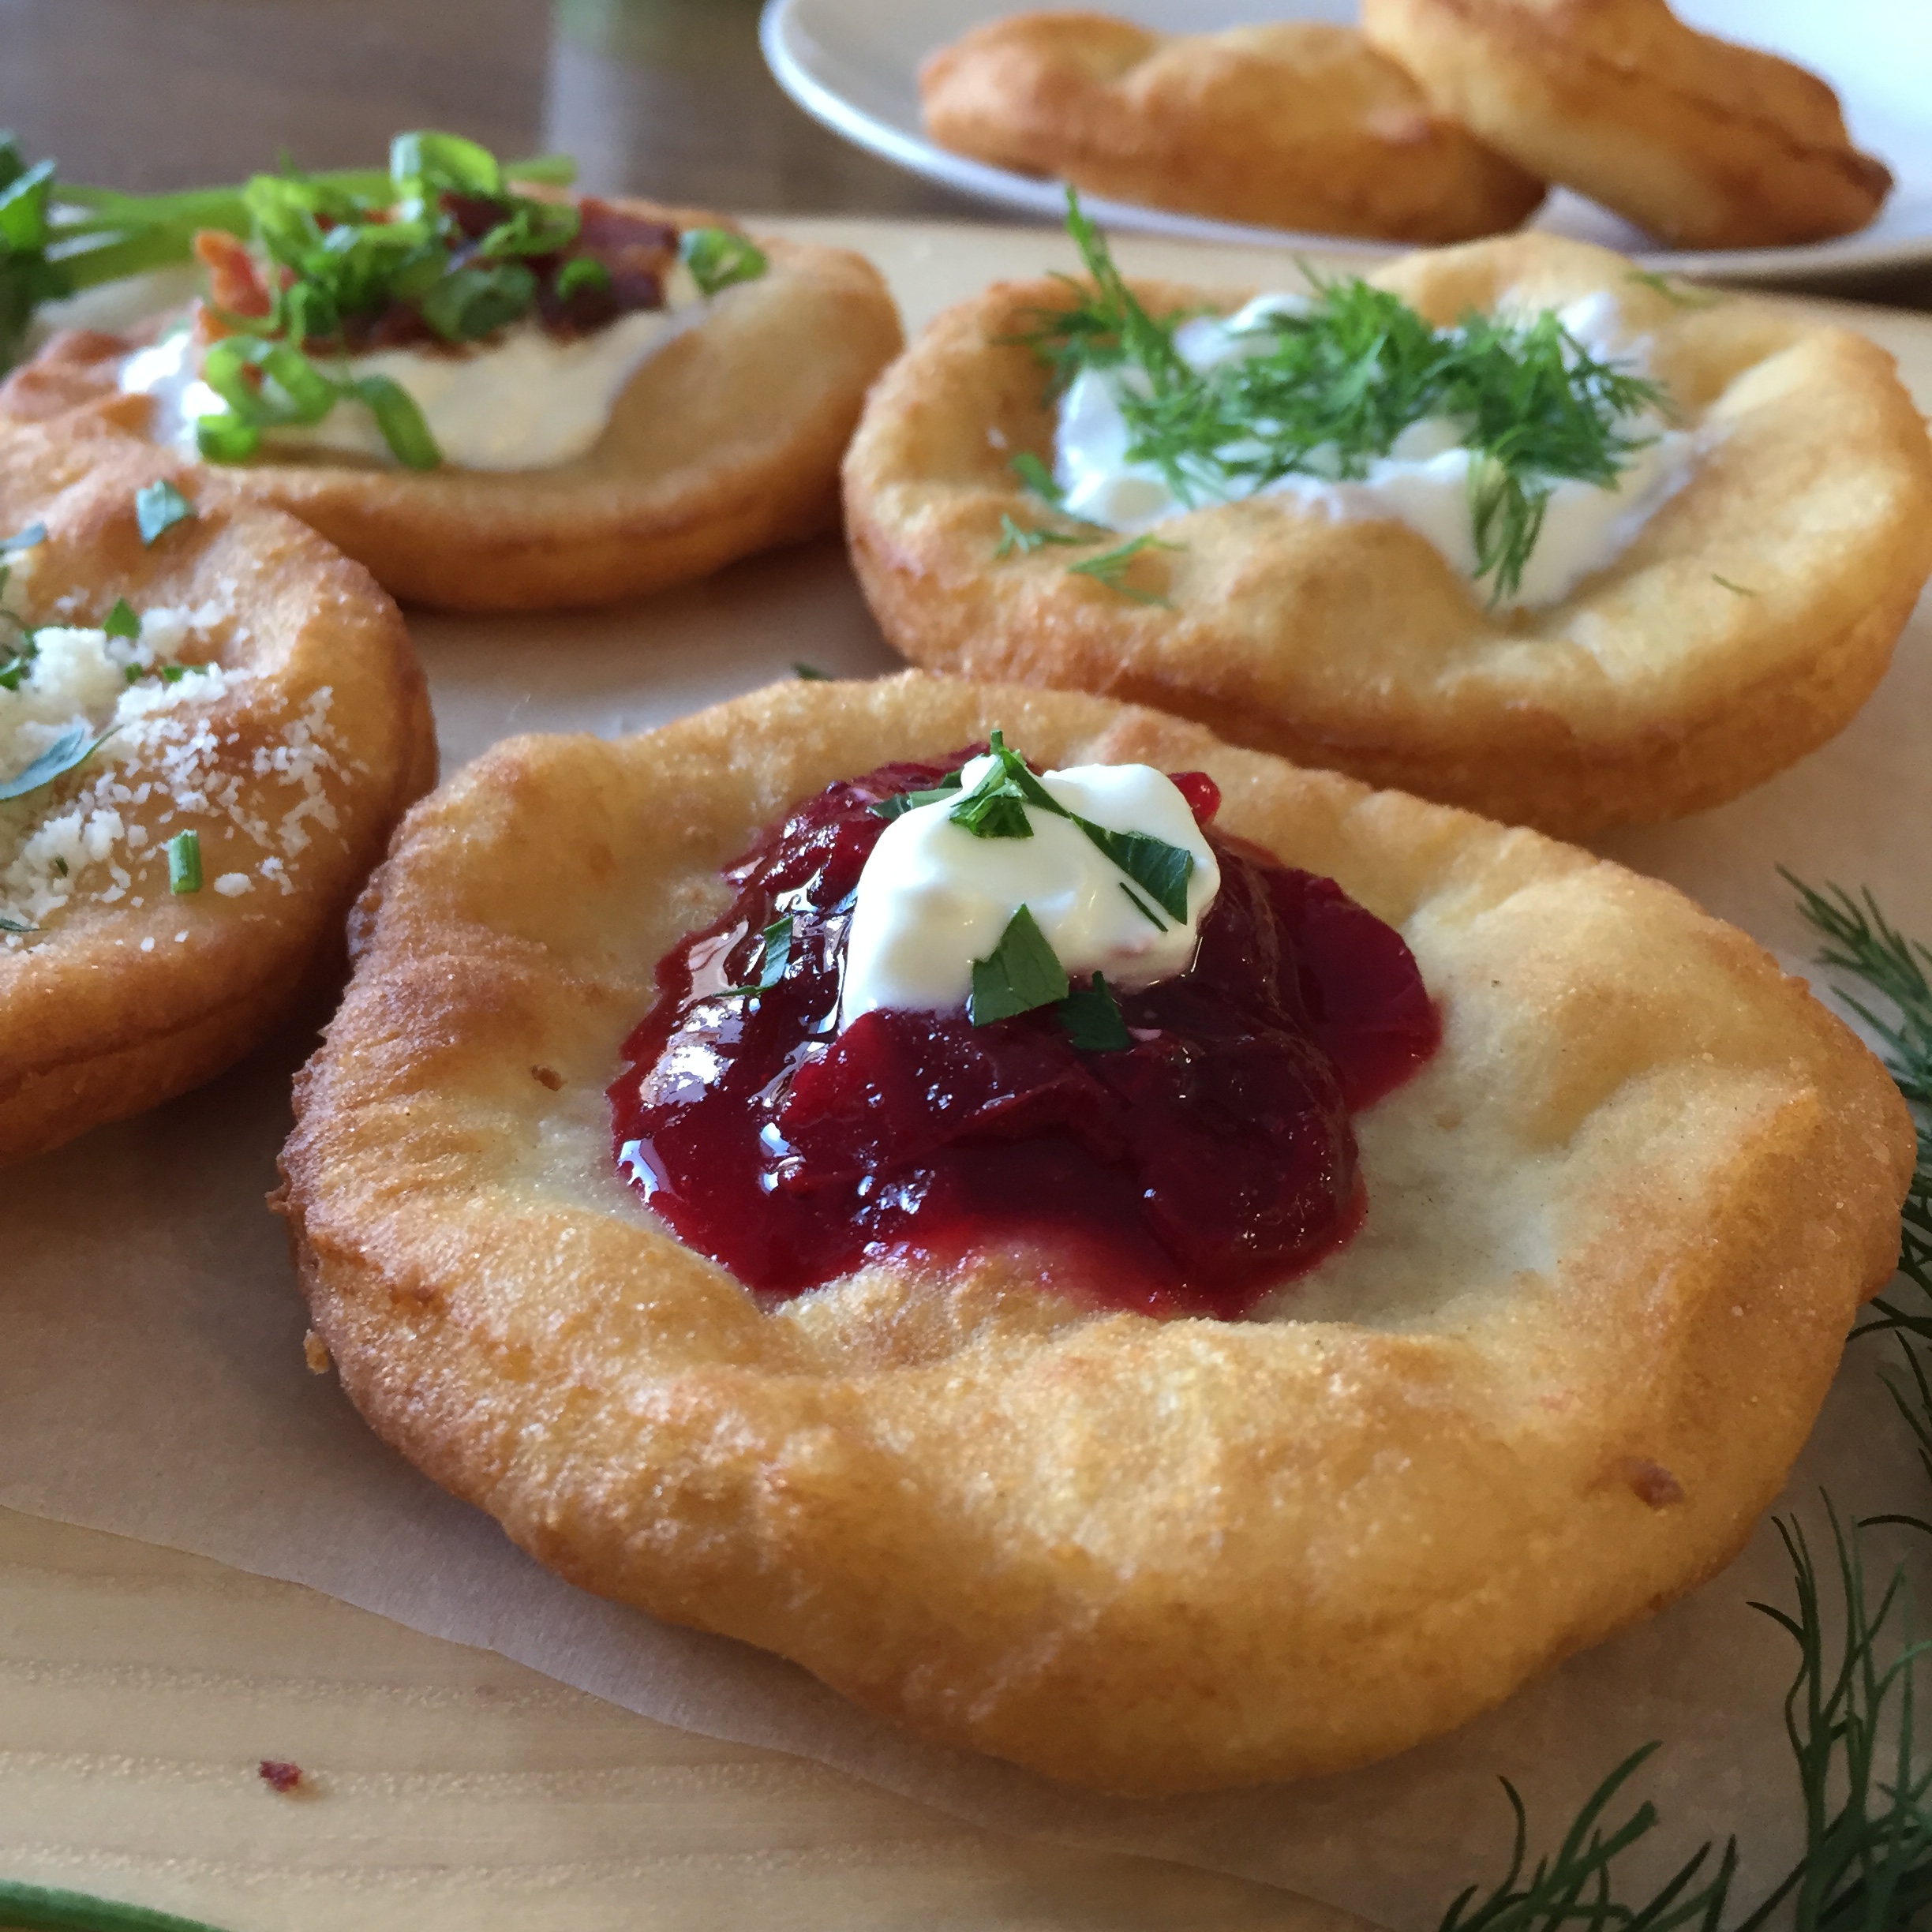 Flyve drage Sow bånd Hungarian Fried Bread - Lángos - The Hungary Soul